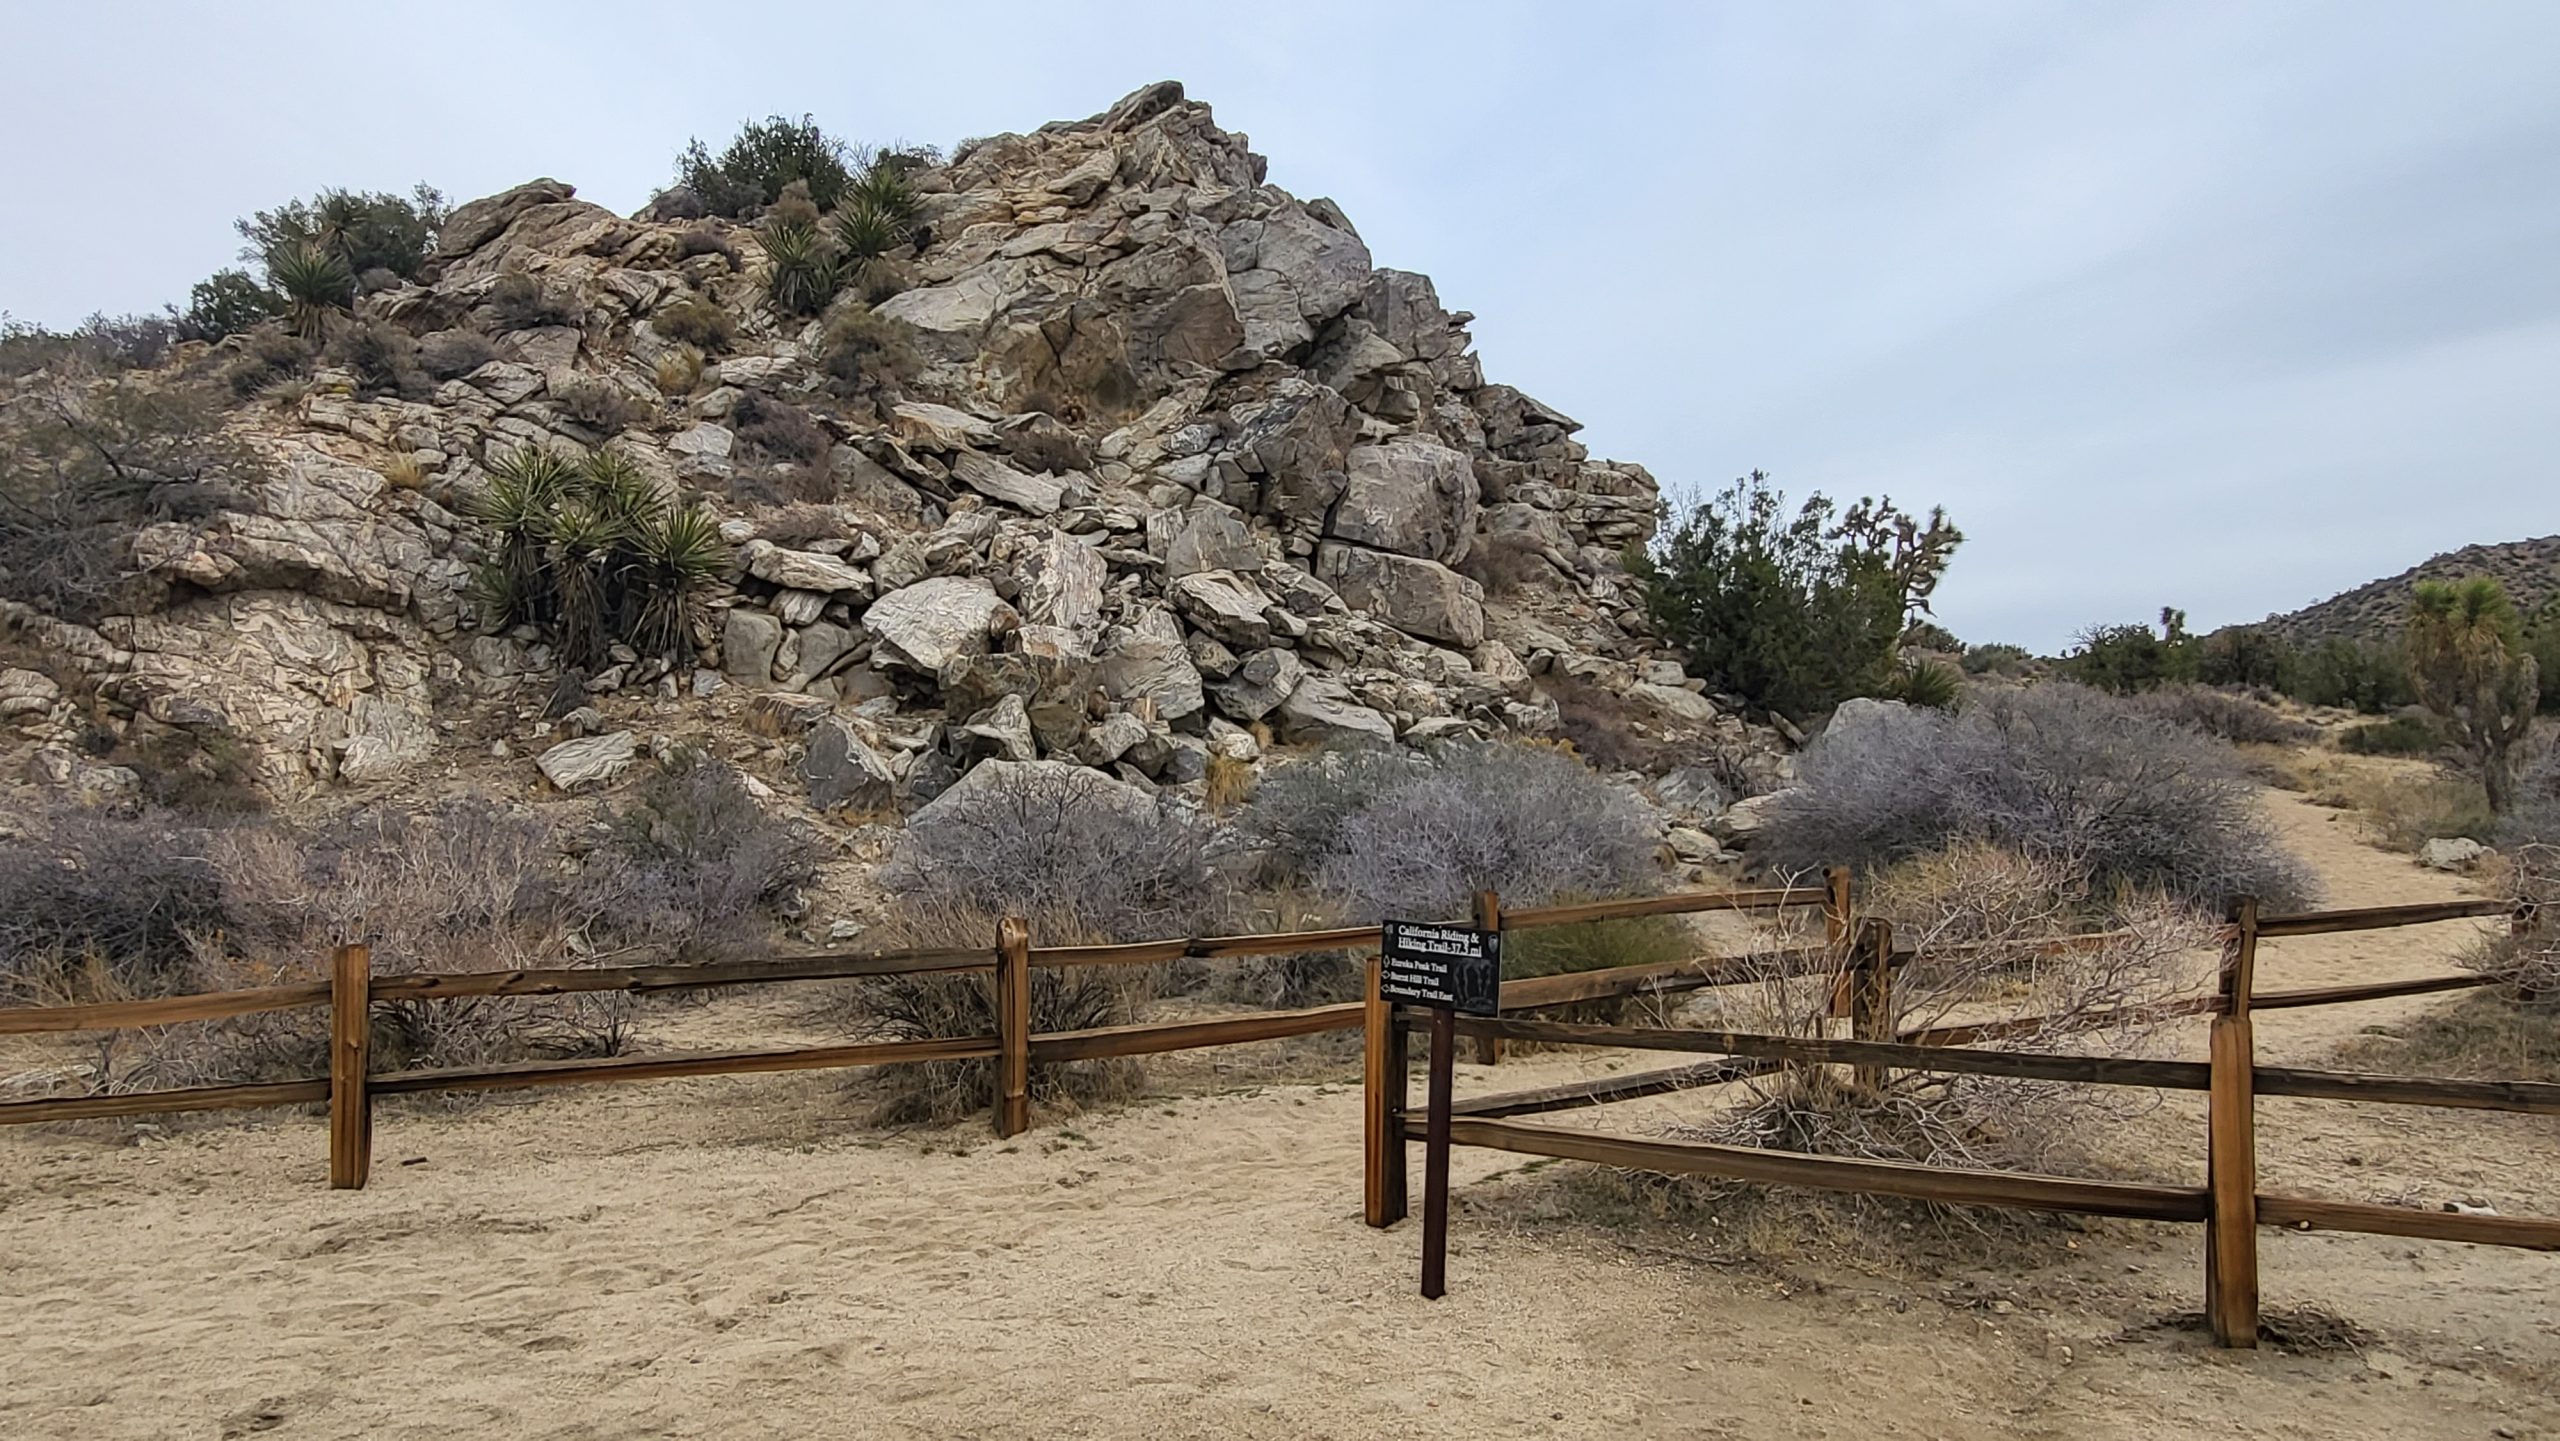 A Cloudy Afternoon Day Hike at Joshua Tree Nationwide Park, California – Unlit Rock Canyon place – December 2022